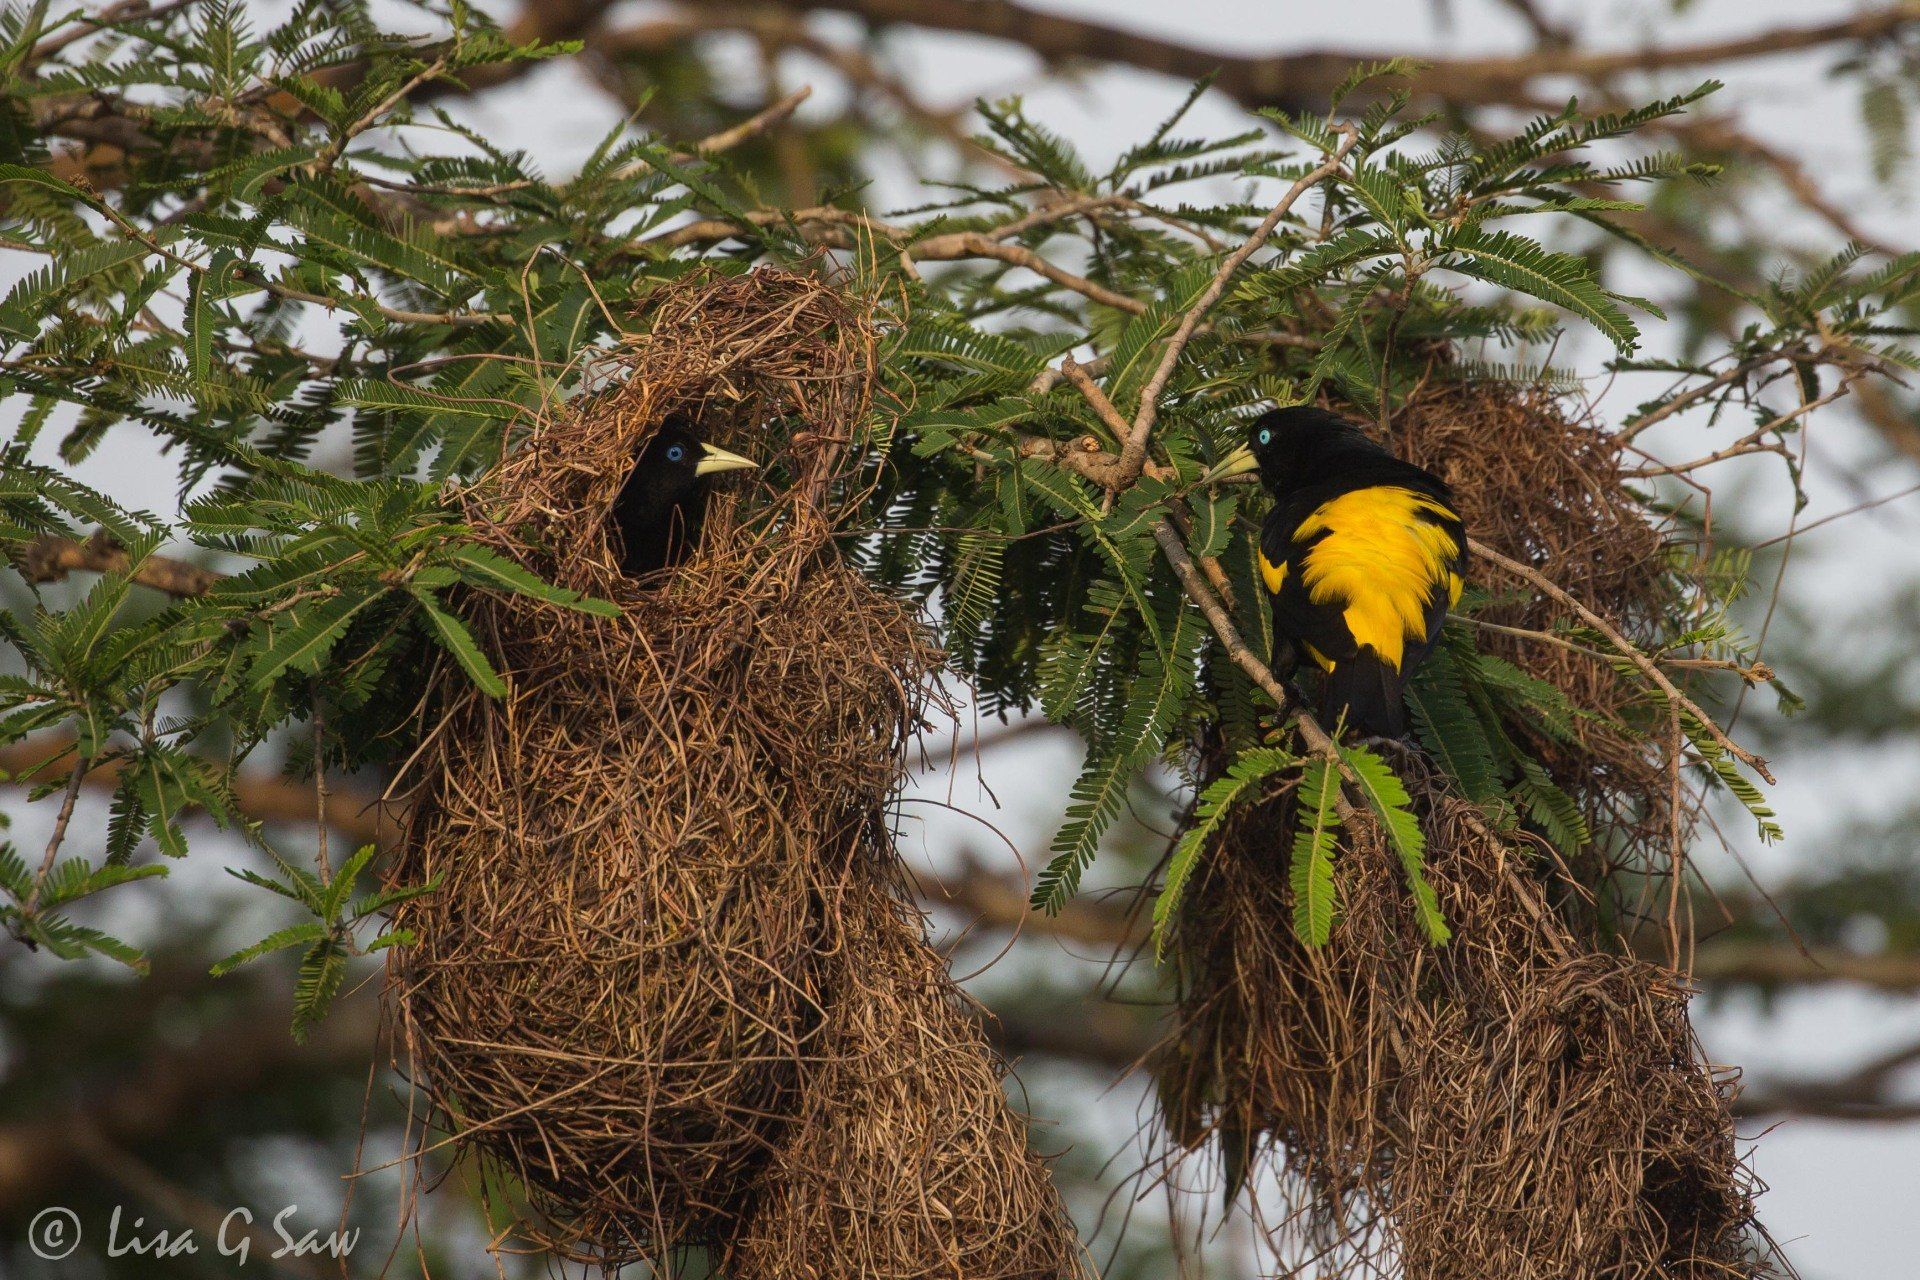 Two Yellow-Rumped Cacique at nest